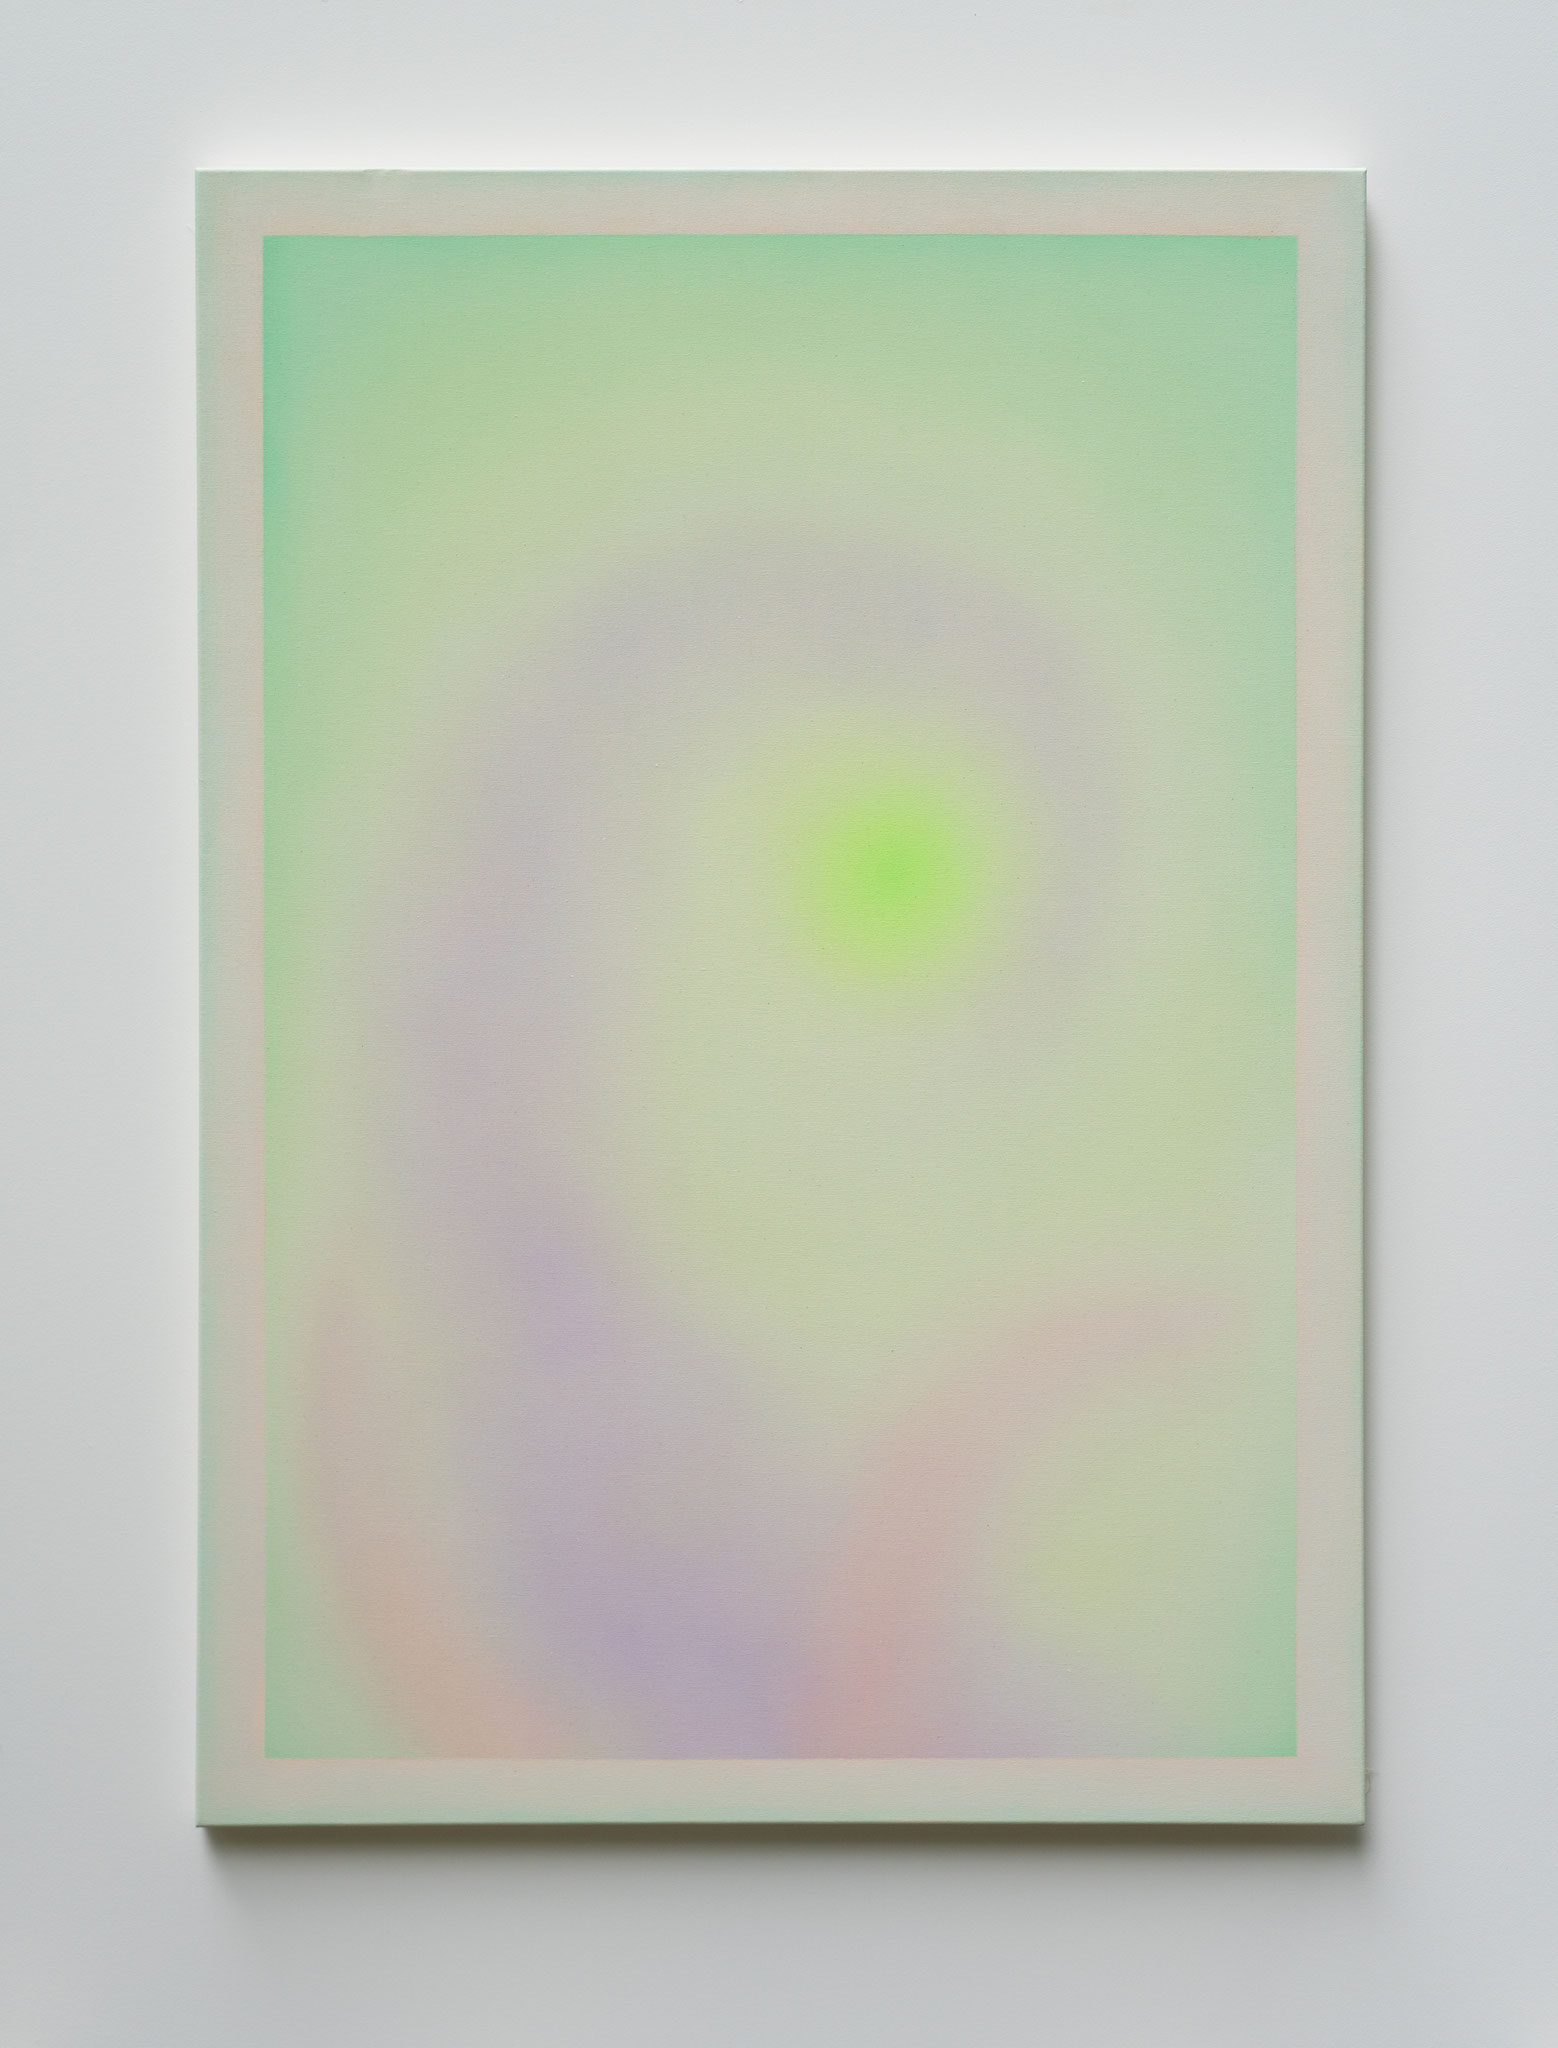 Alina Birkner "Untitled (Outer Planet Seedling)" 2020, 170x120 cm, Acrylic on Canvas